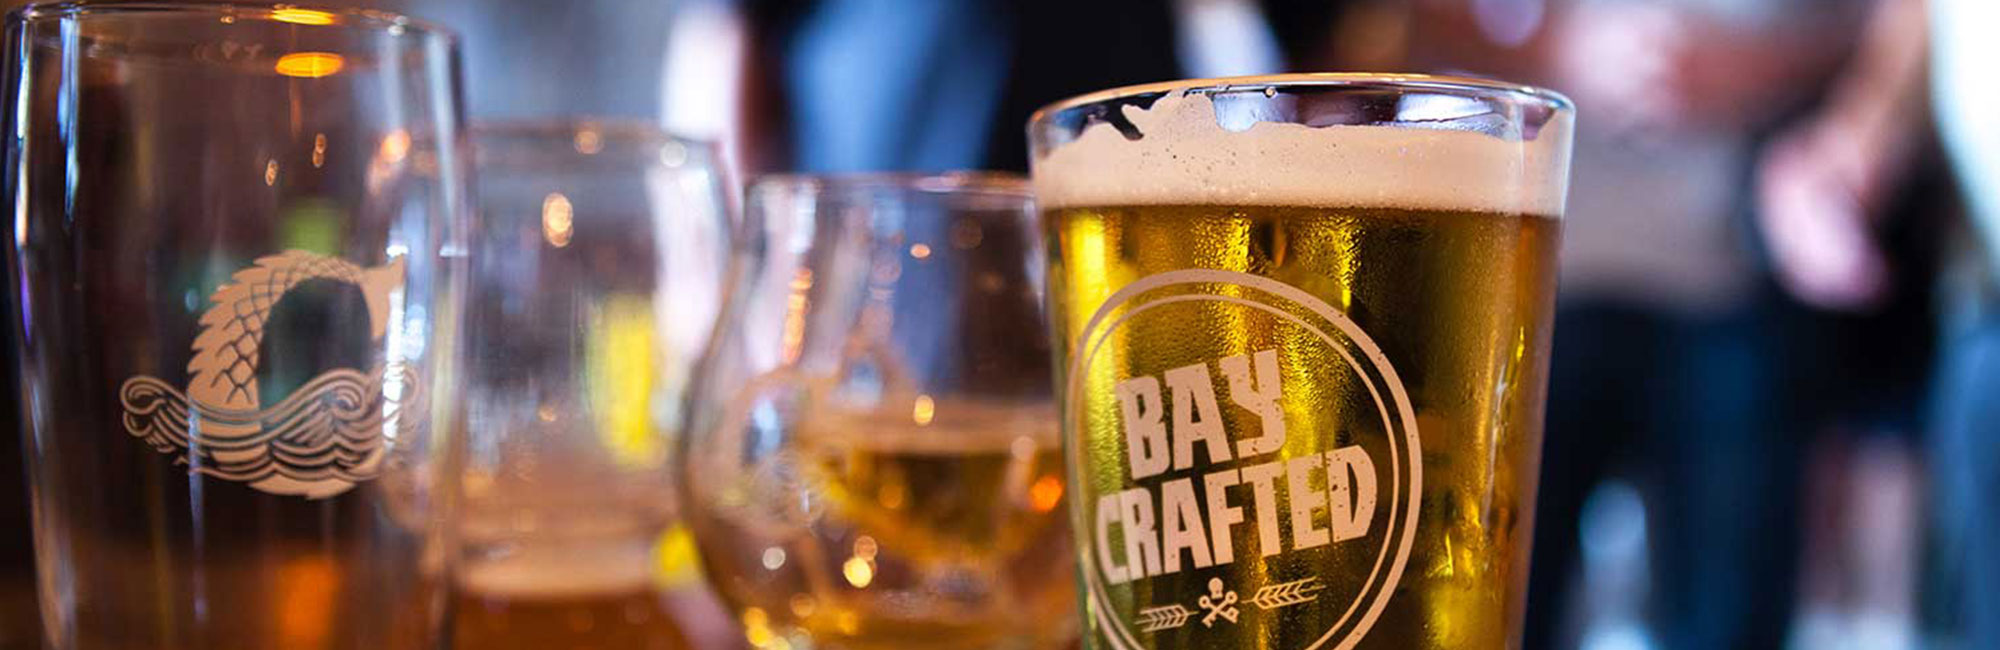 bay crafted craft beer